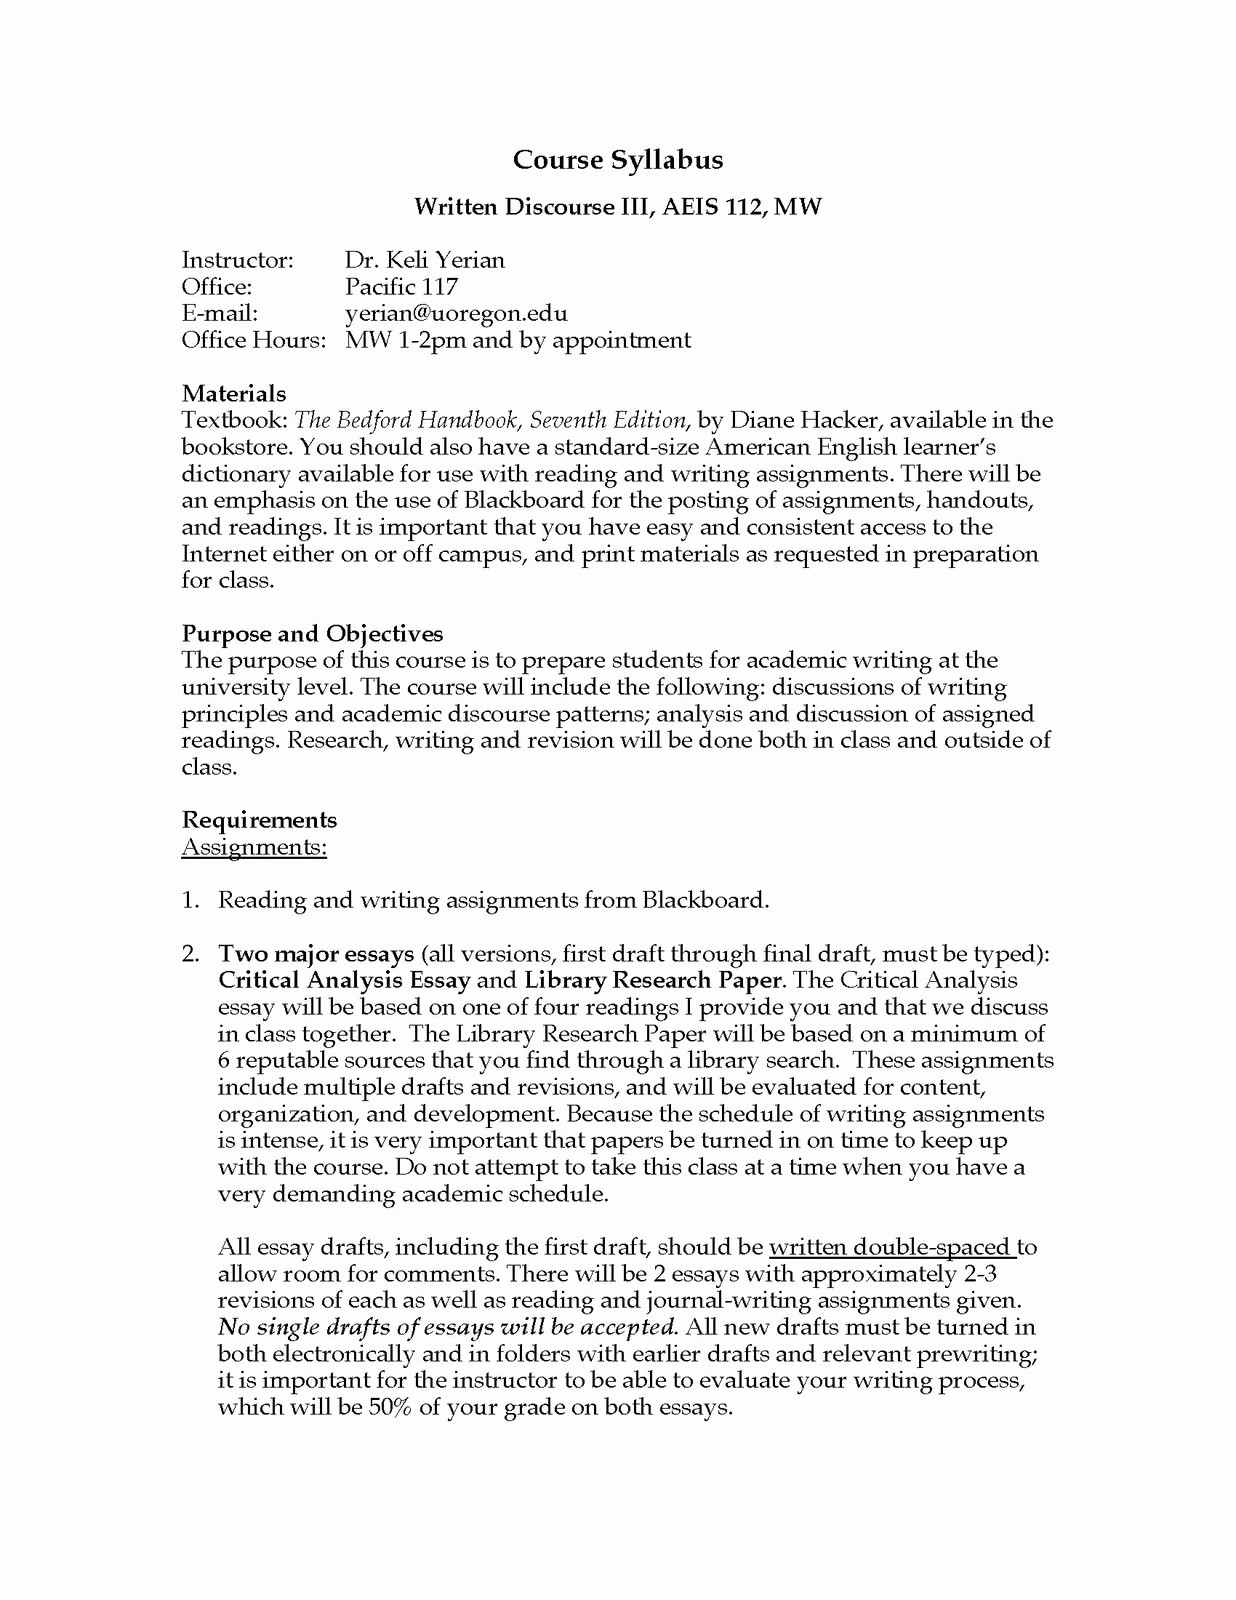 Free Syllabus Template for Teachers Inspirational Example High School Course Syllabus Designing A